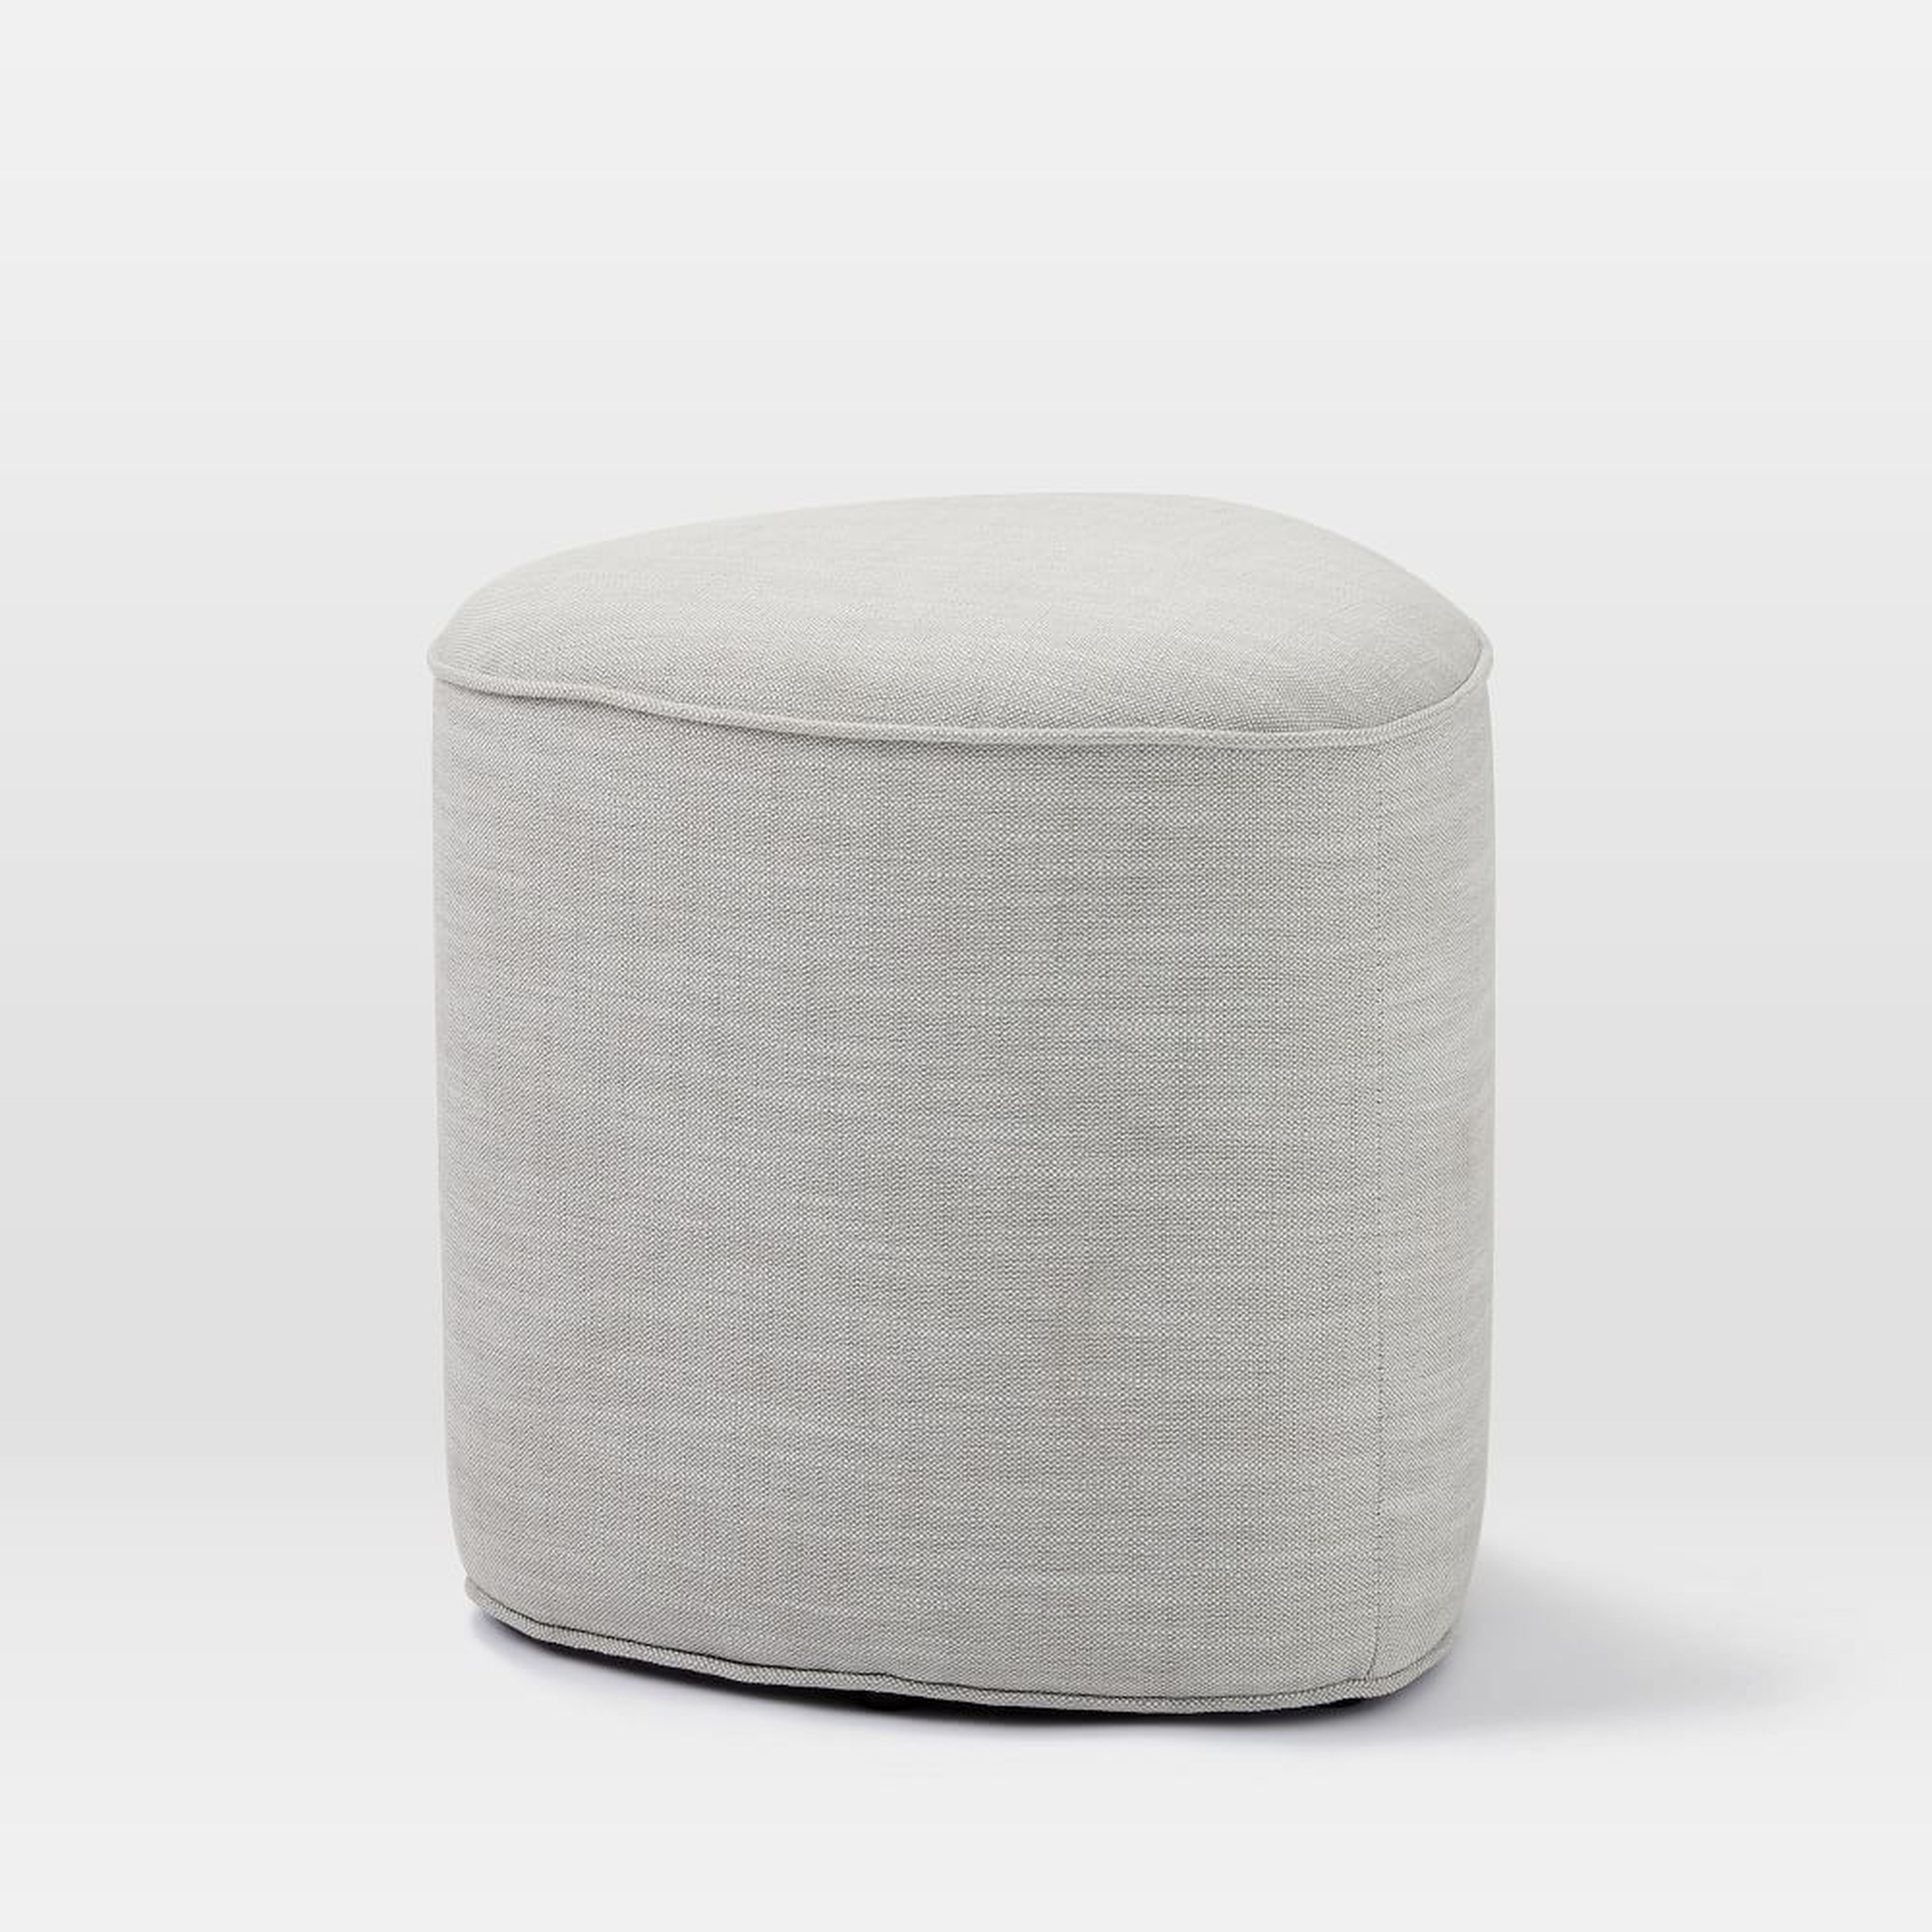 Pebble Small Ottoman, Poly, Yarn Dyed Linen Weave, Frost Gray, Concealed Supports - West Elm